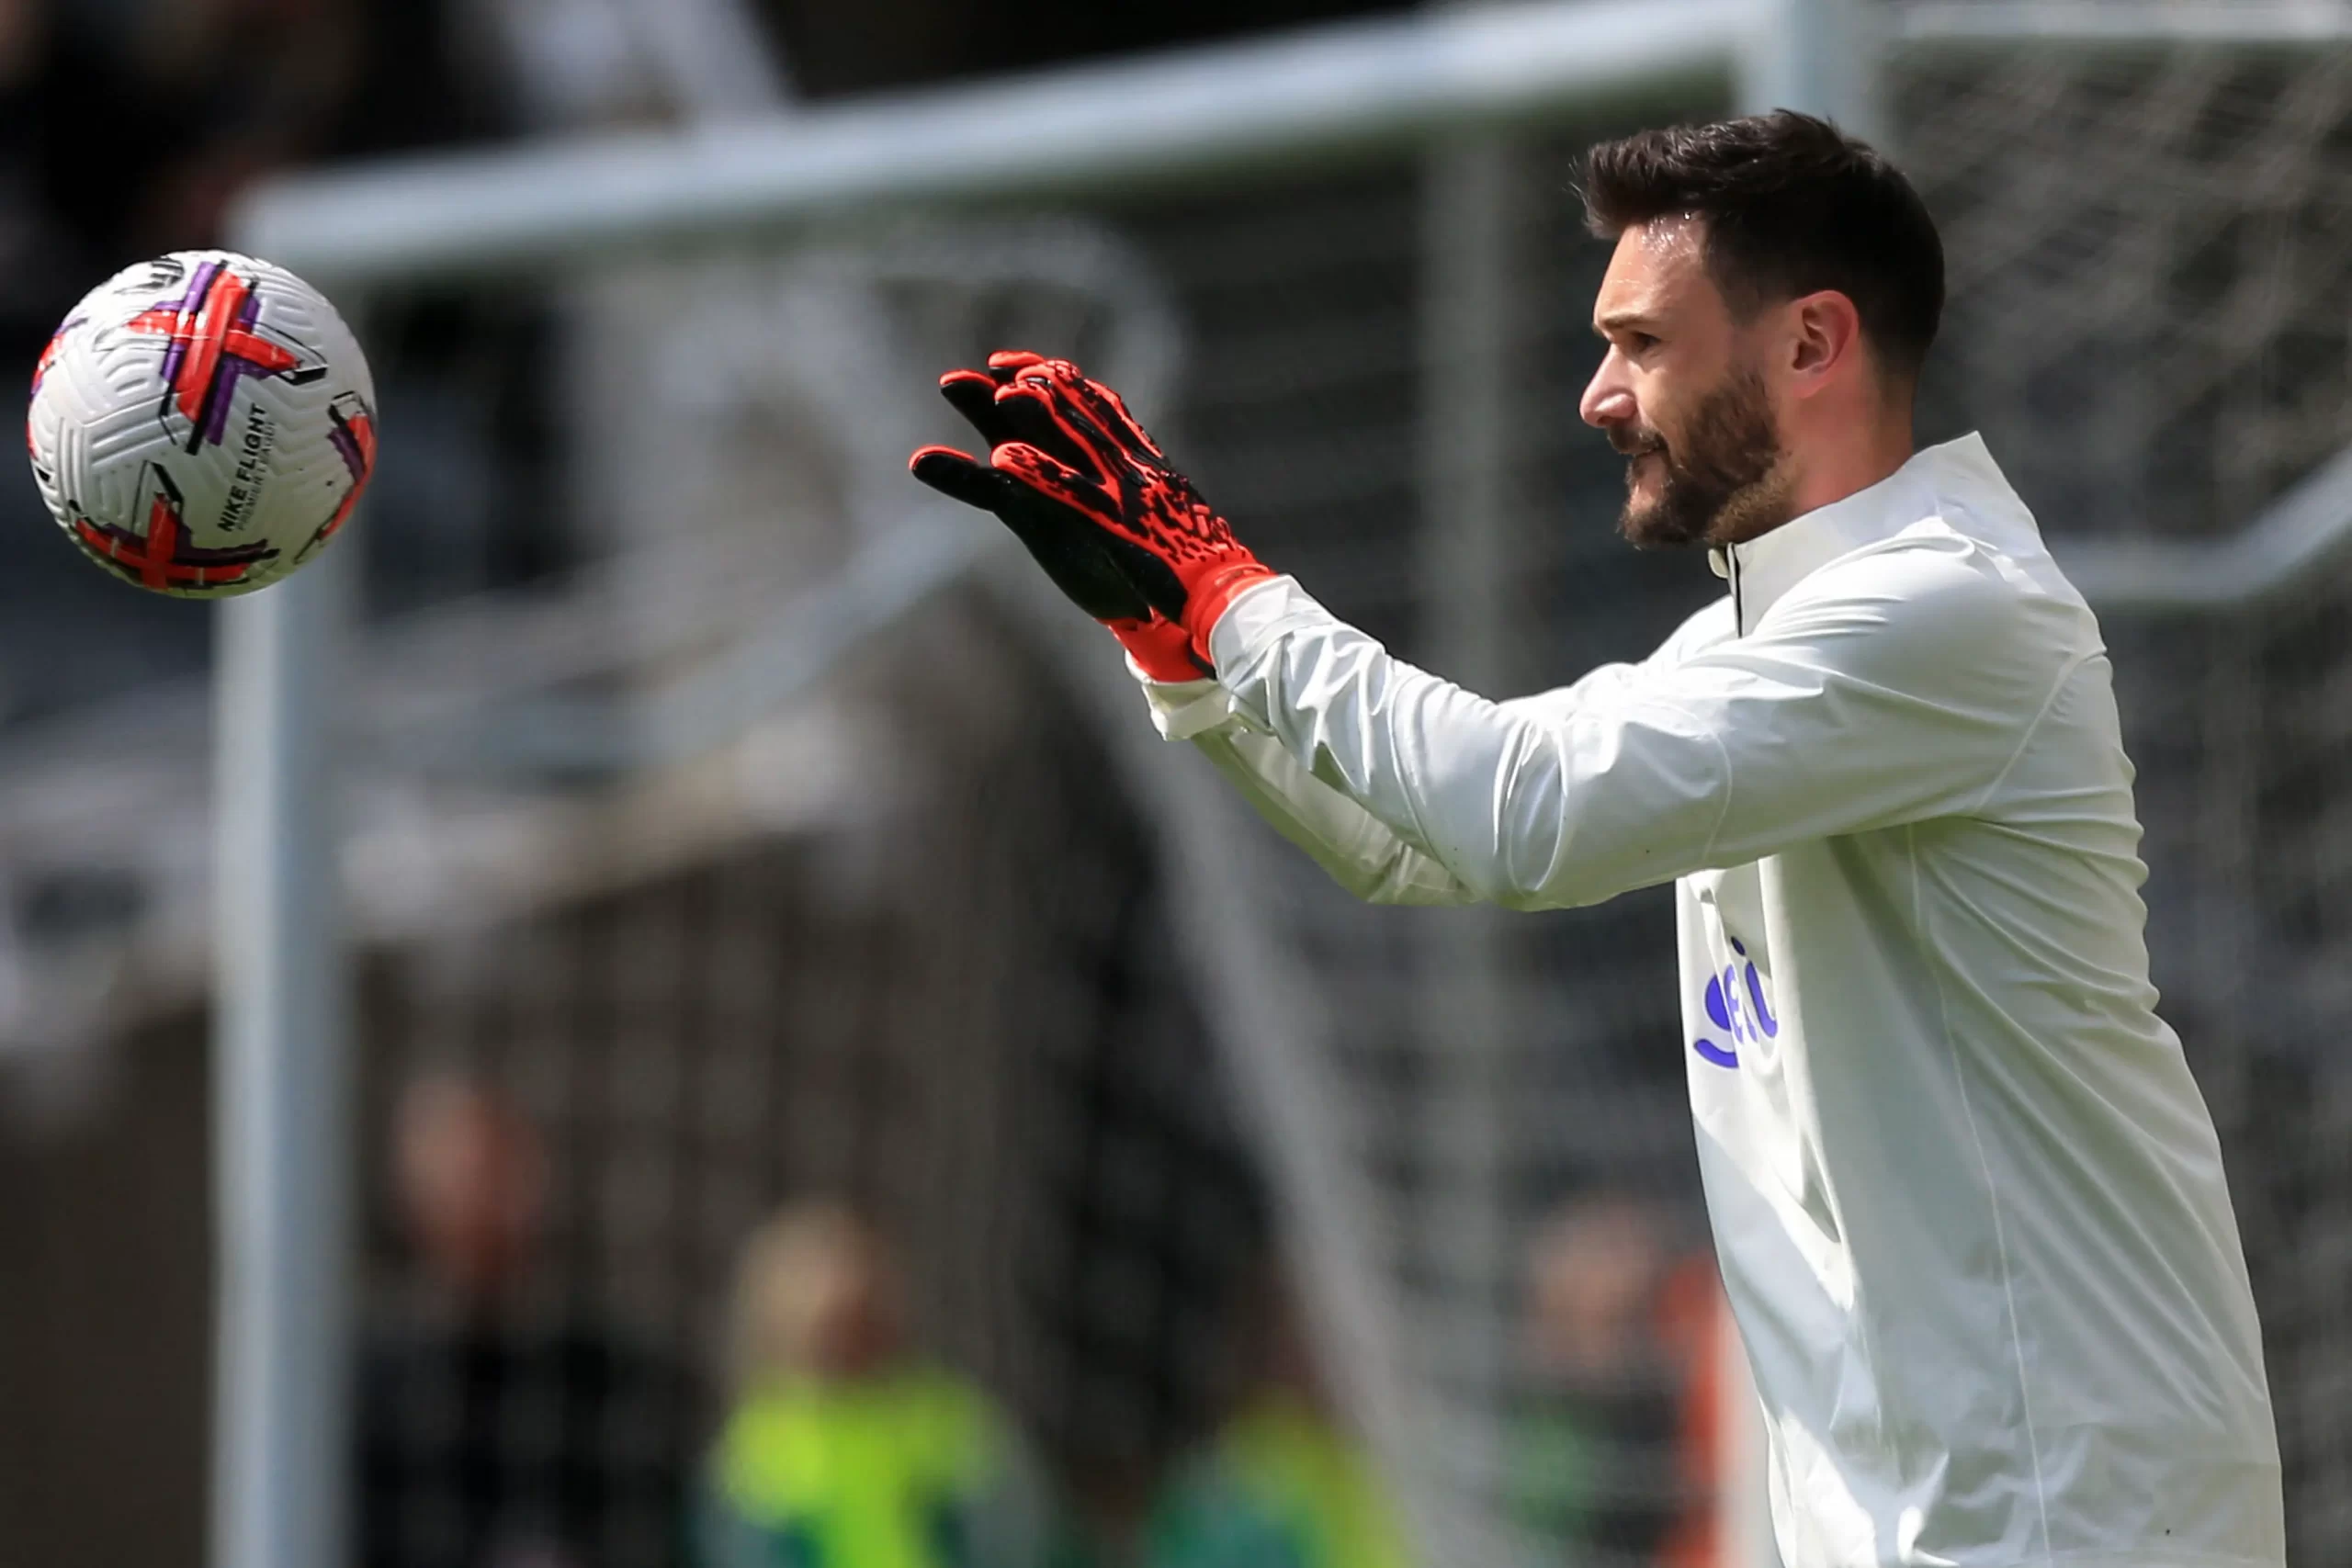 Hugo Lloris is set to depart from Tottenham after spending over a decade with the team.